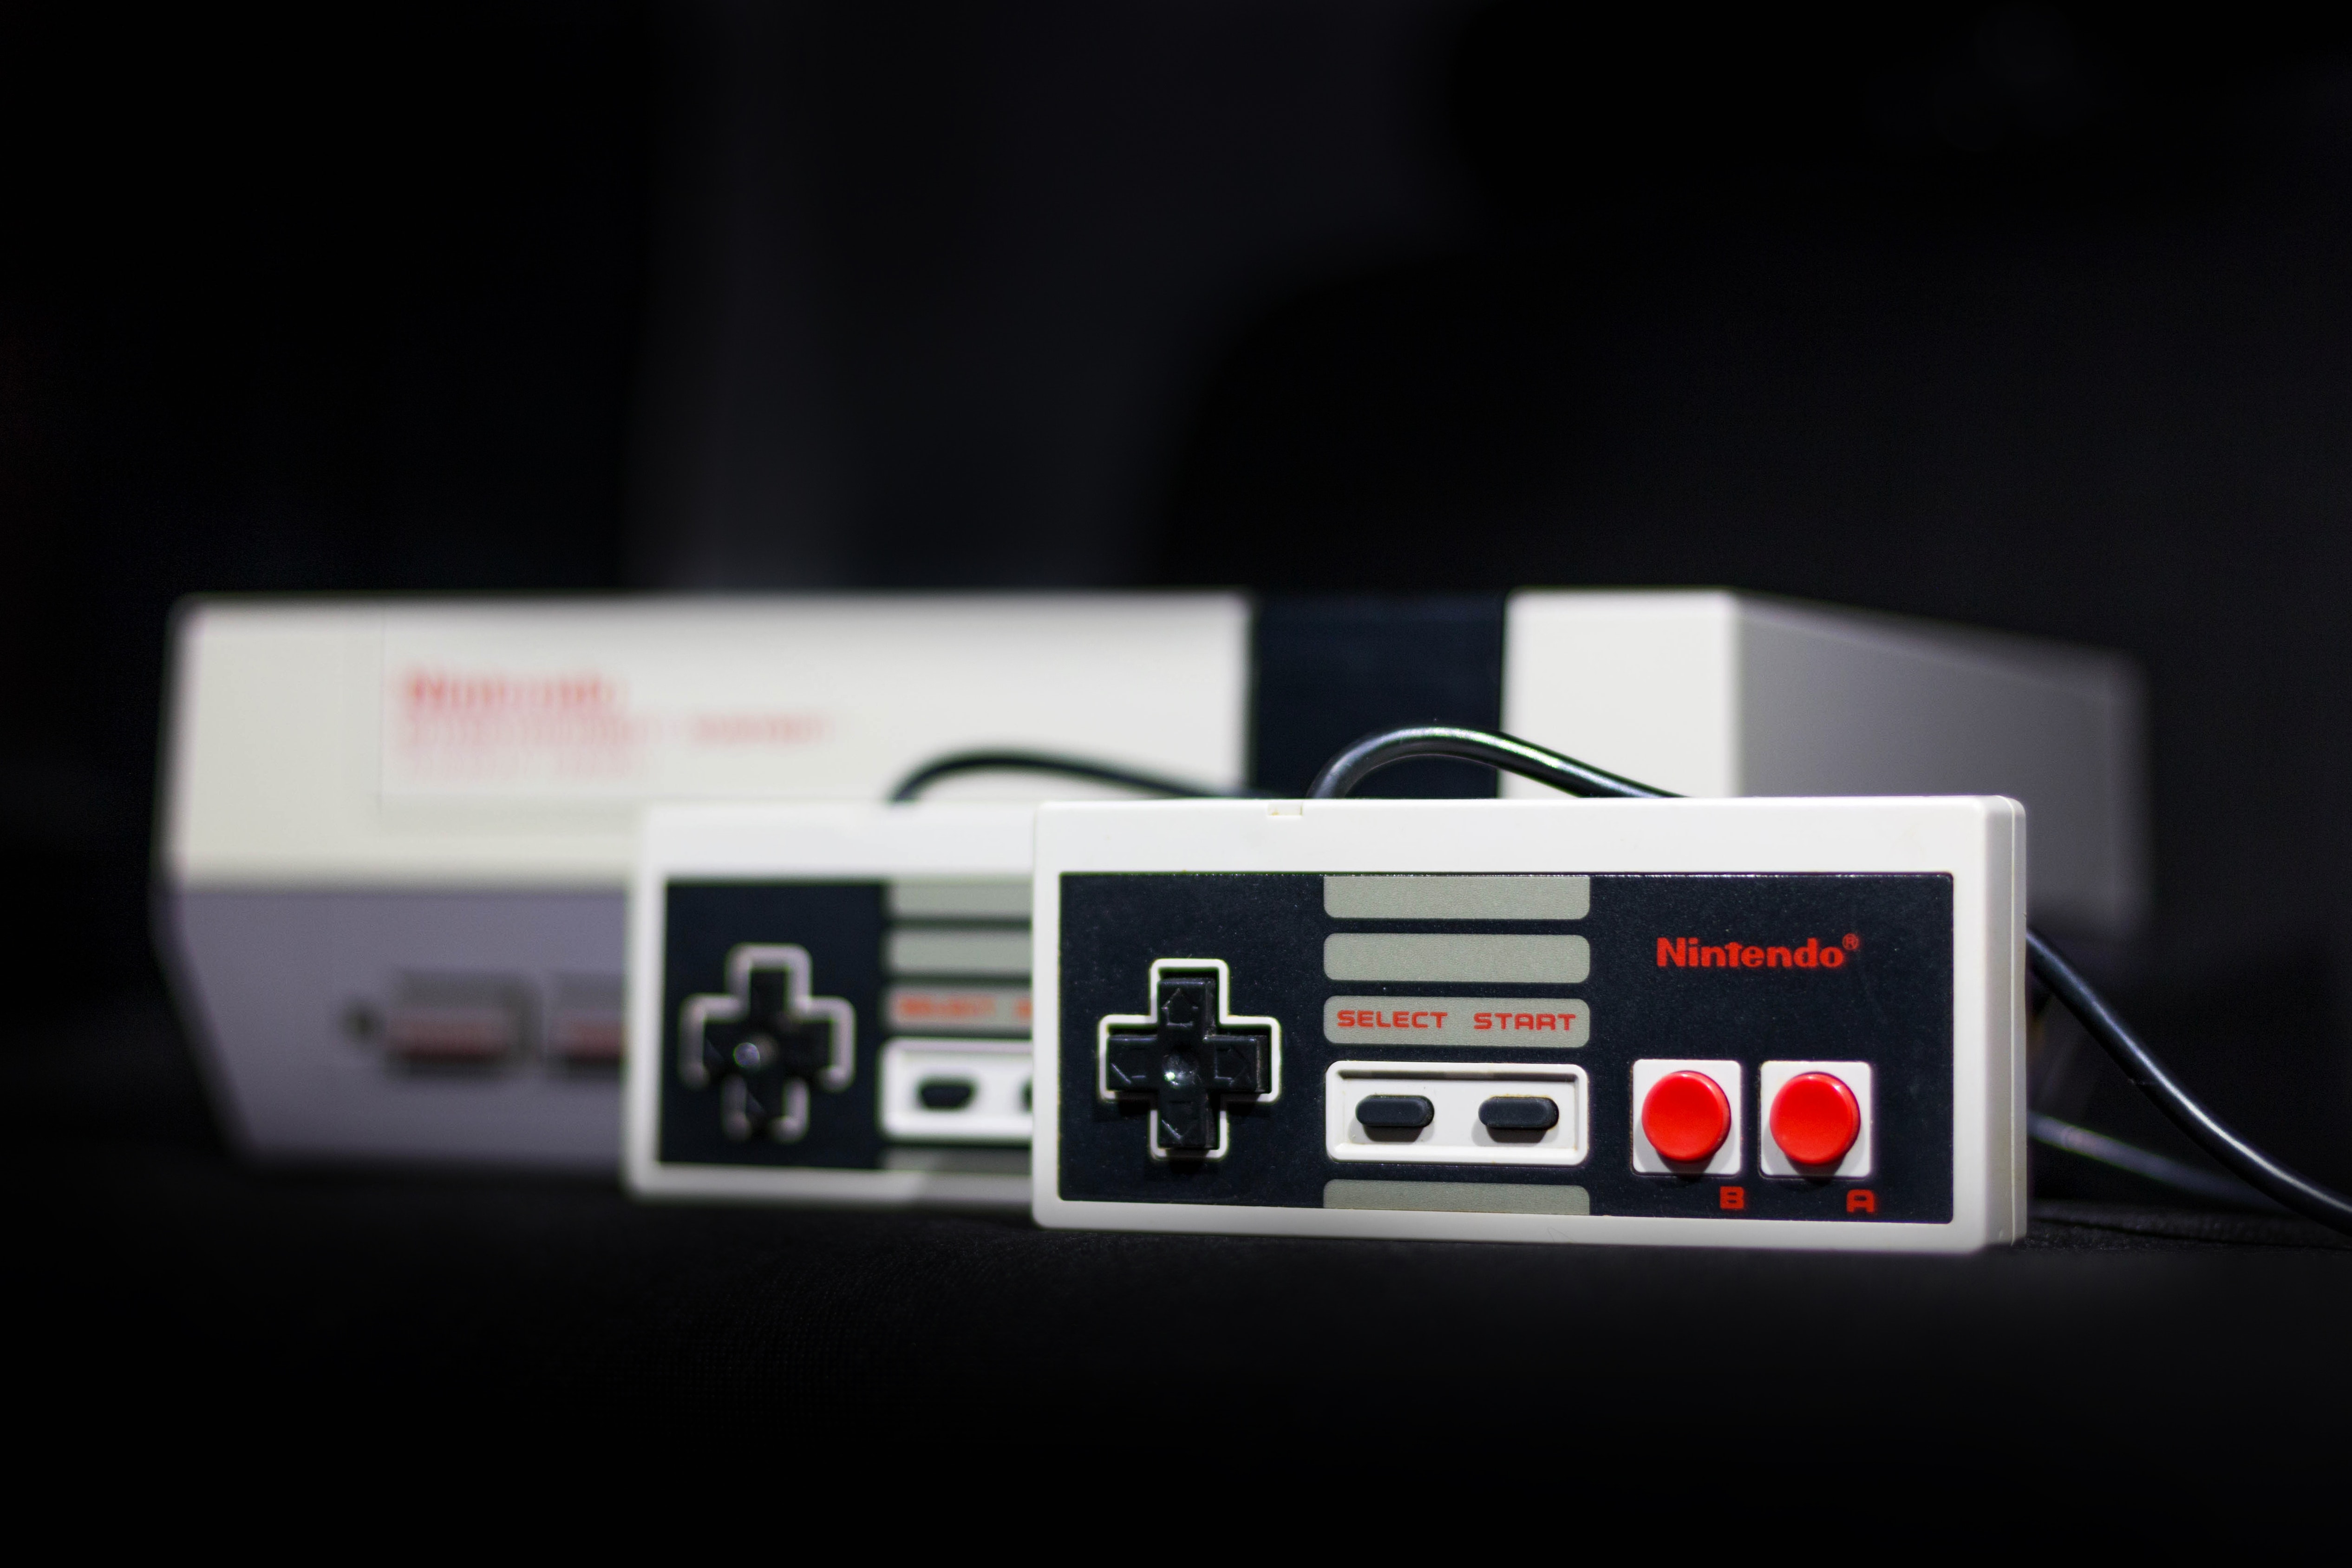 Relive classic games of the past with this Nintendo Classic Mini NES Console.